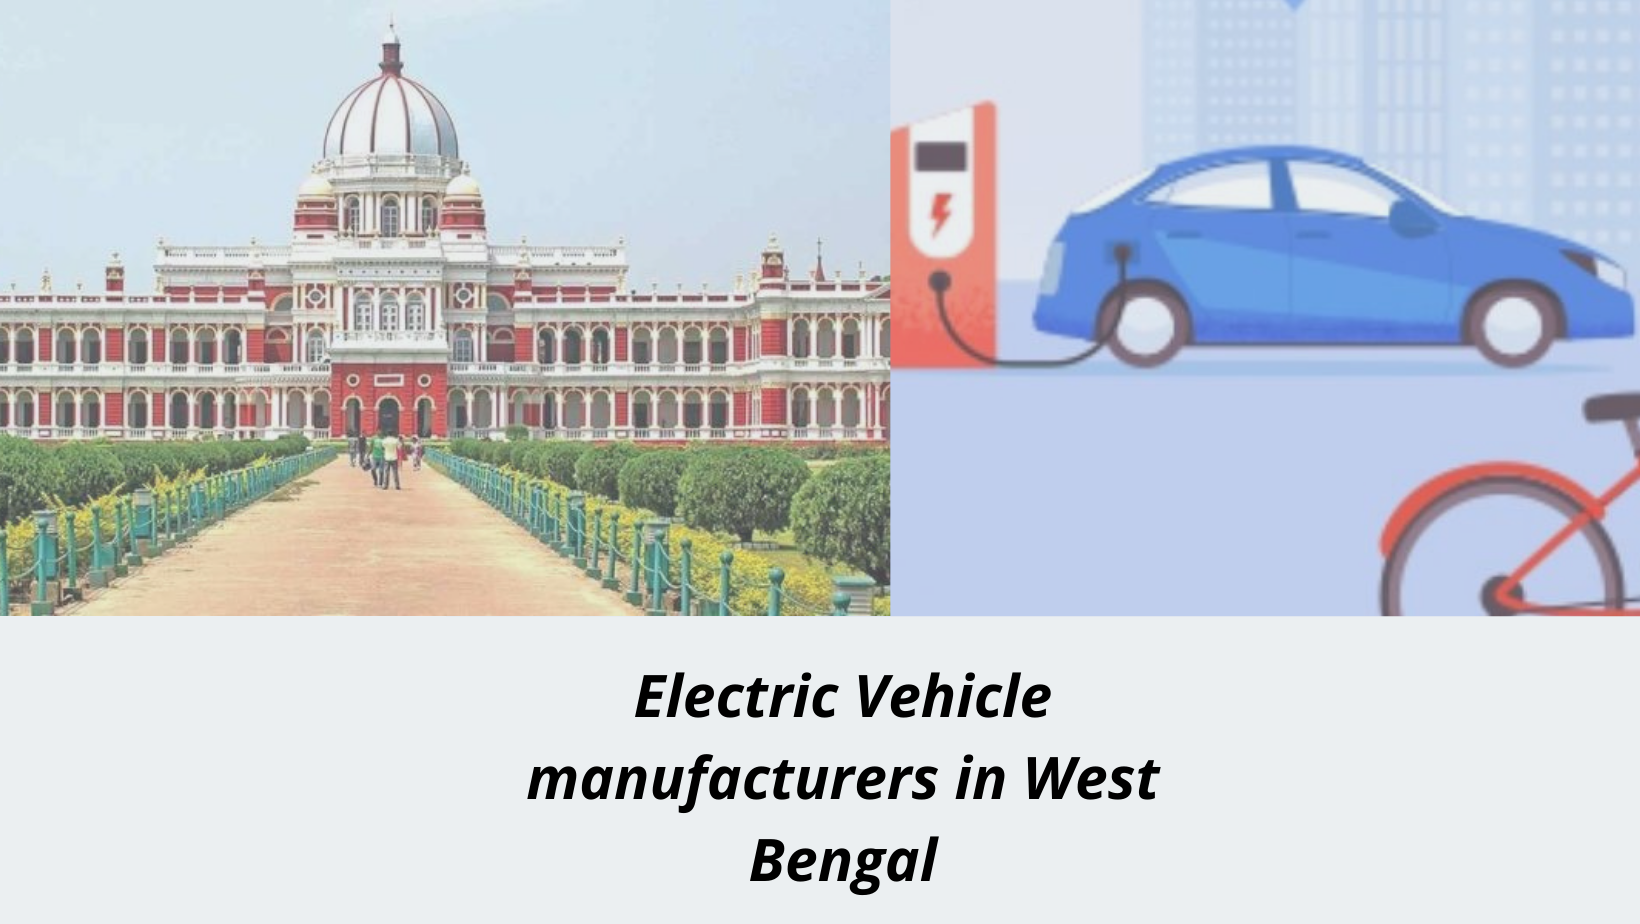 Electric Vehicle manufacturers in West Bengal